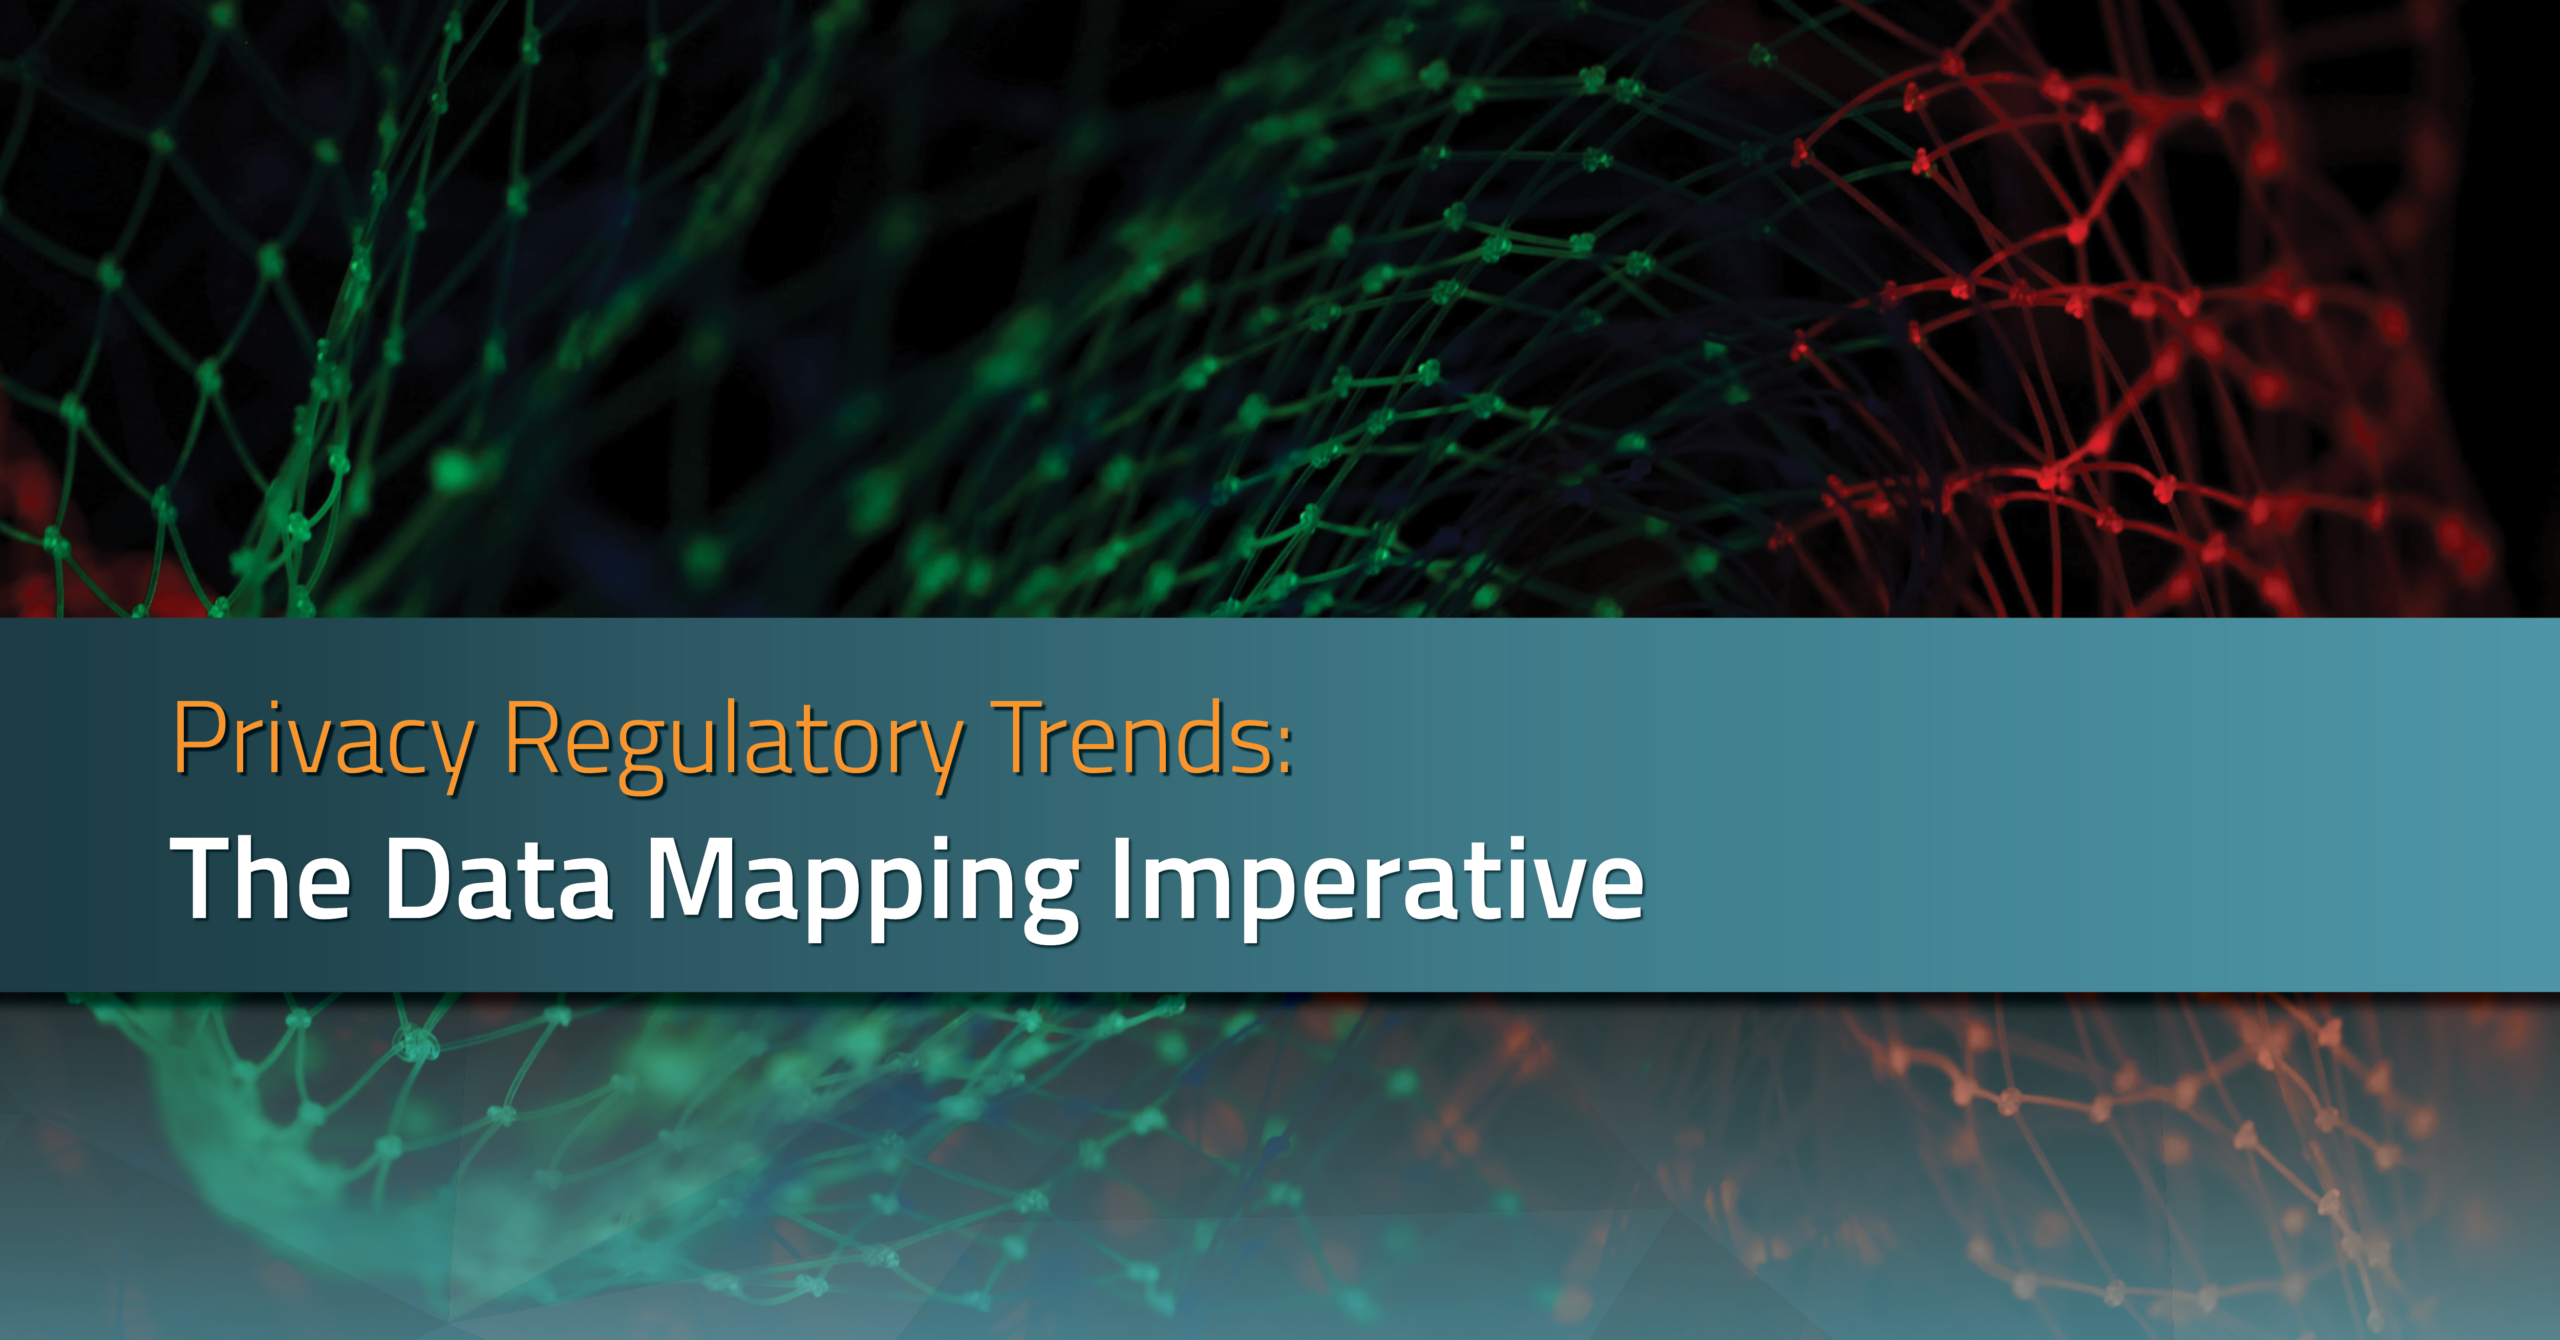 The Data Mapping Imperative